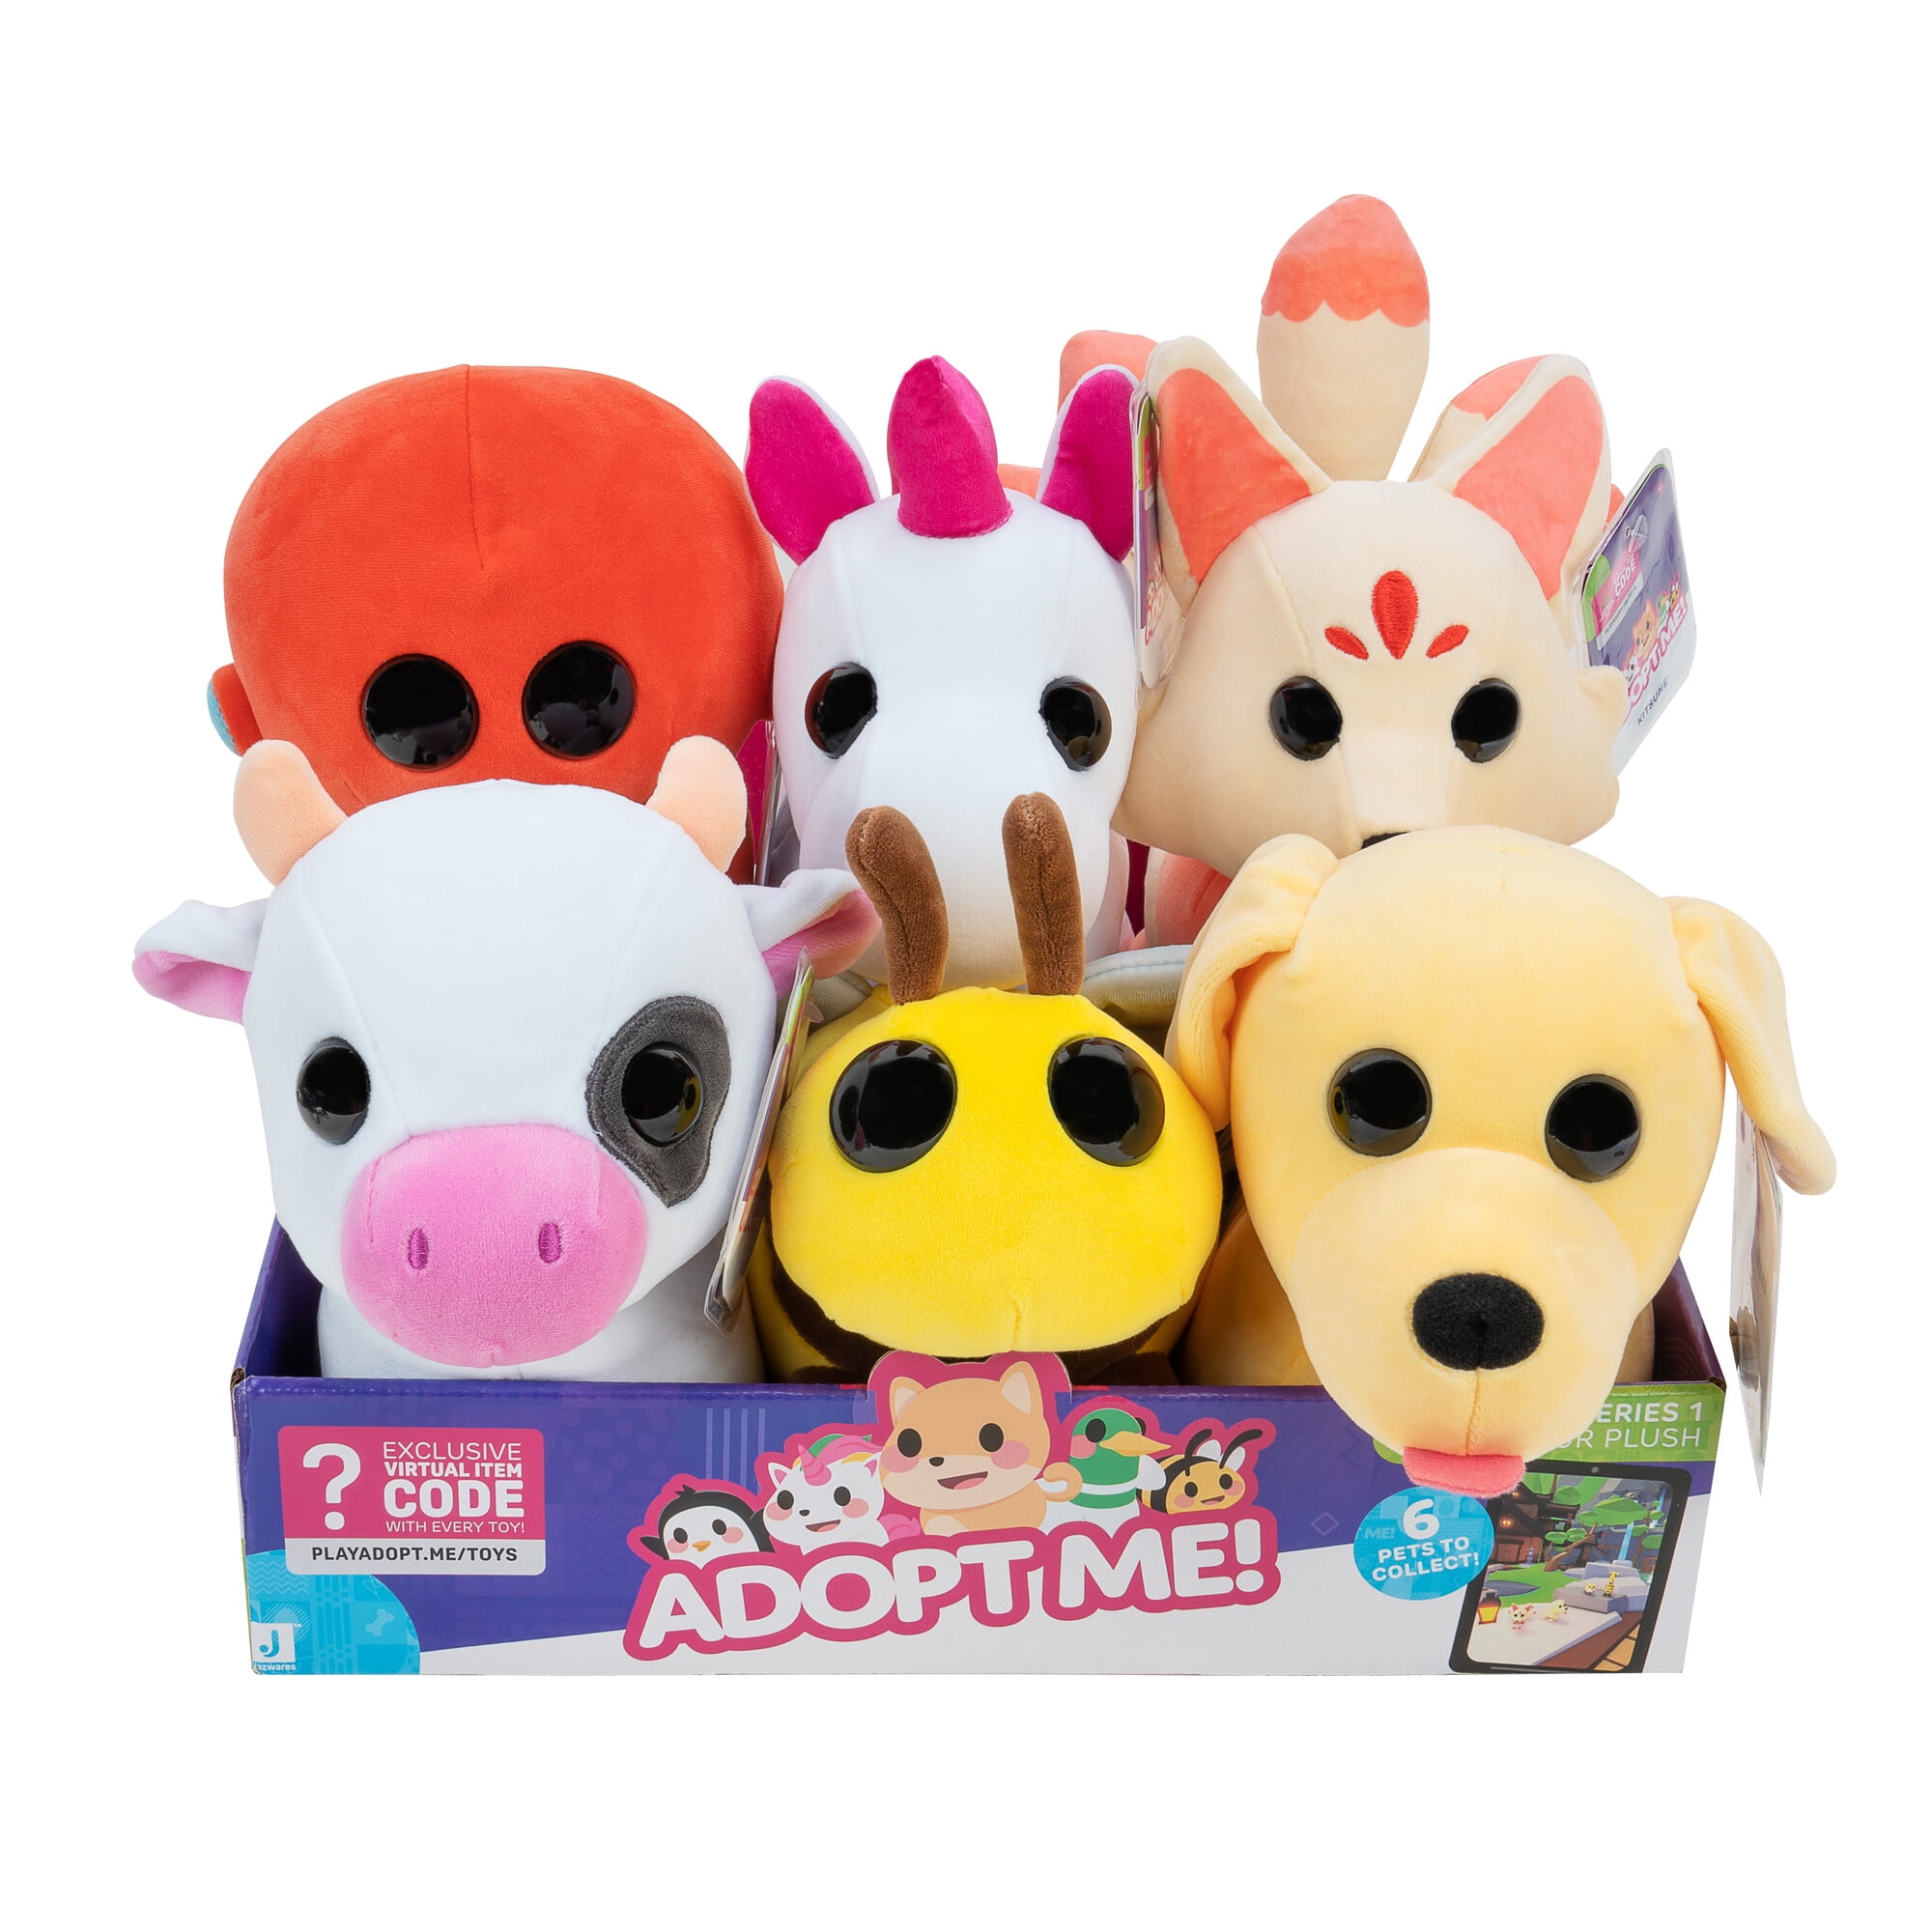 Adopt Me! 10 Pack Mystery Pets - Series 1-10 Pets - Top Online Game -  Exclusive Virtual Item Code Included - Fun Collectible Toys for Kids  Featuring